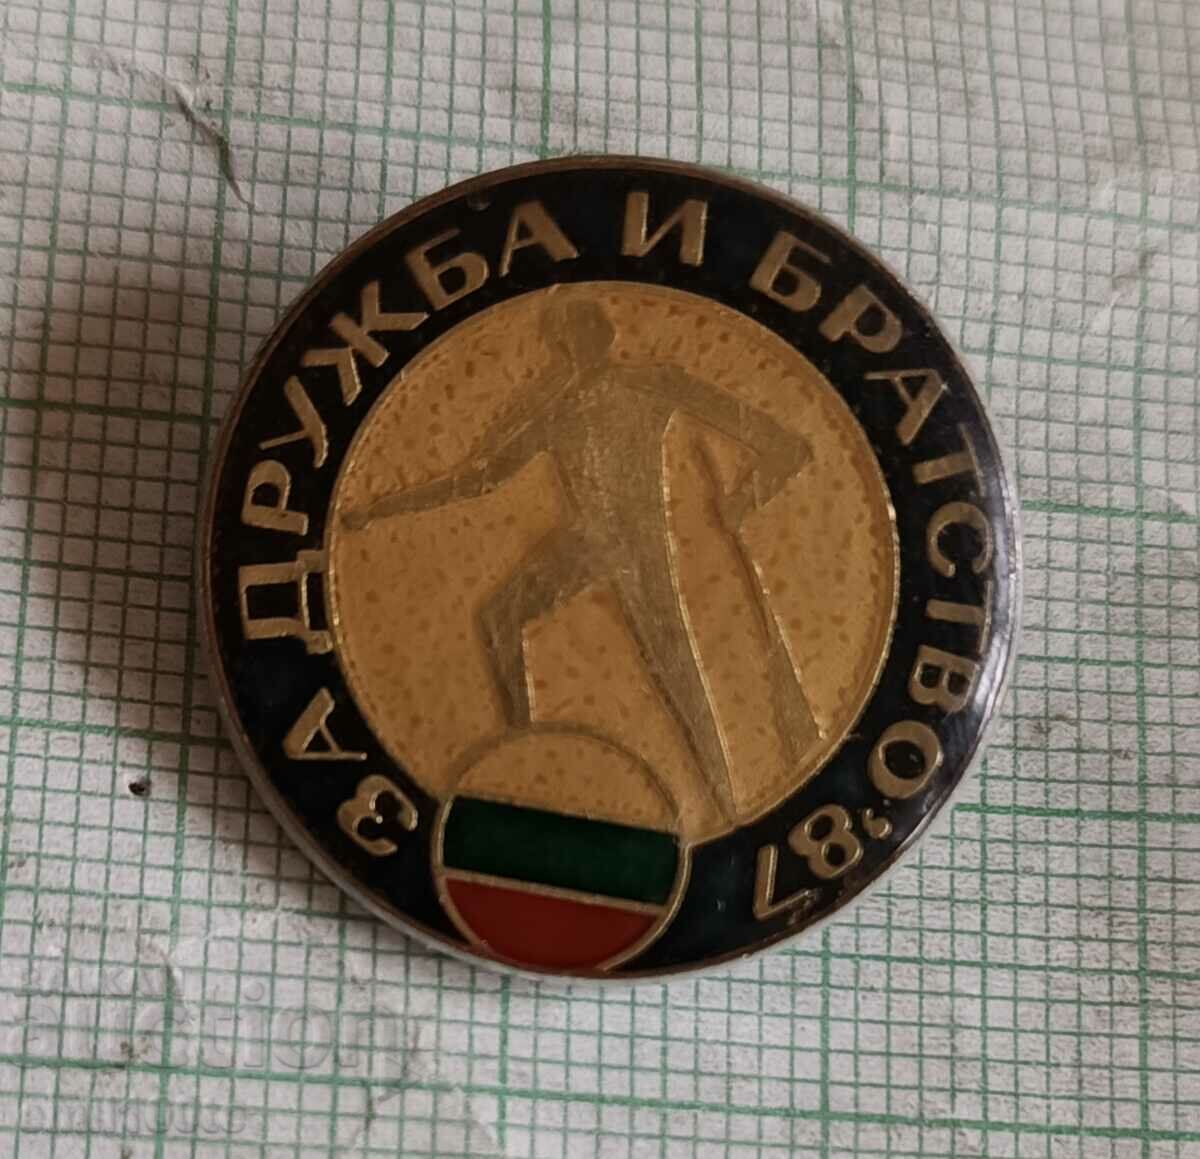 Badge - For friendship and brotherhood